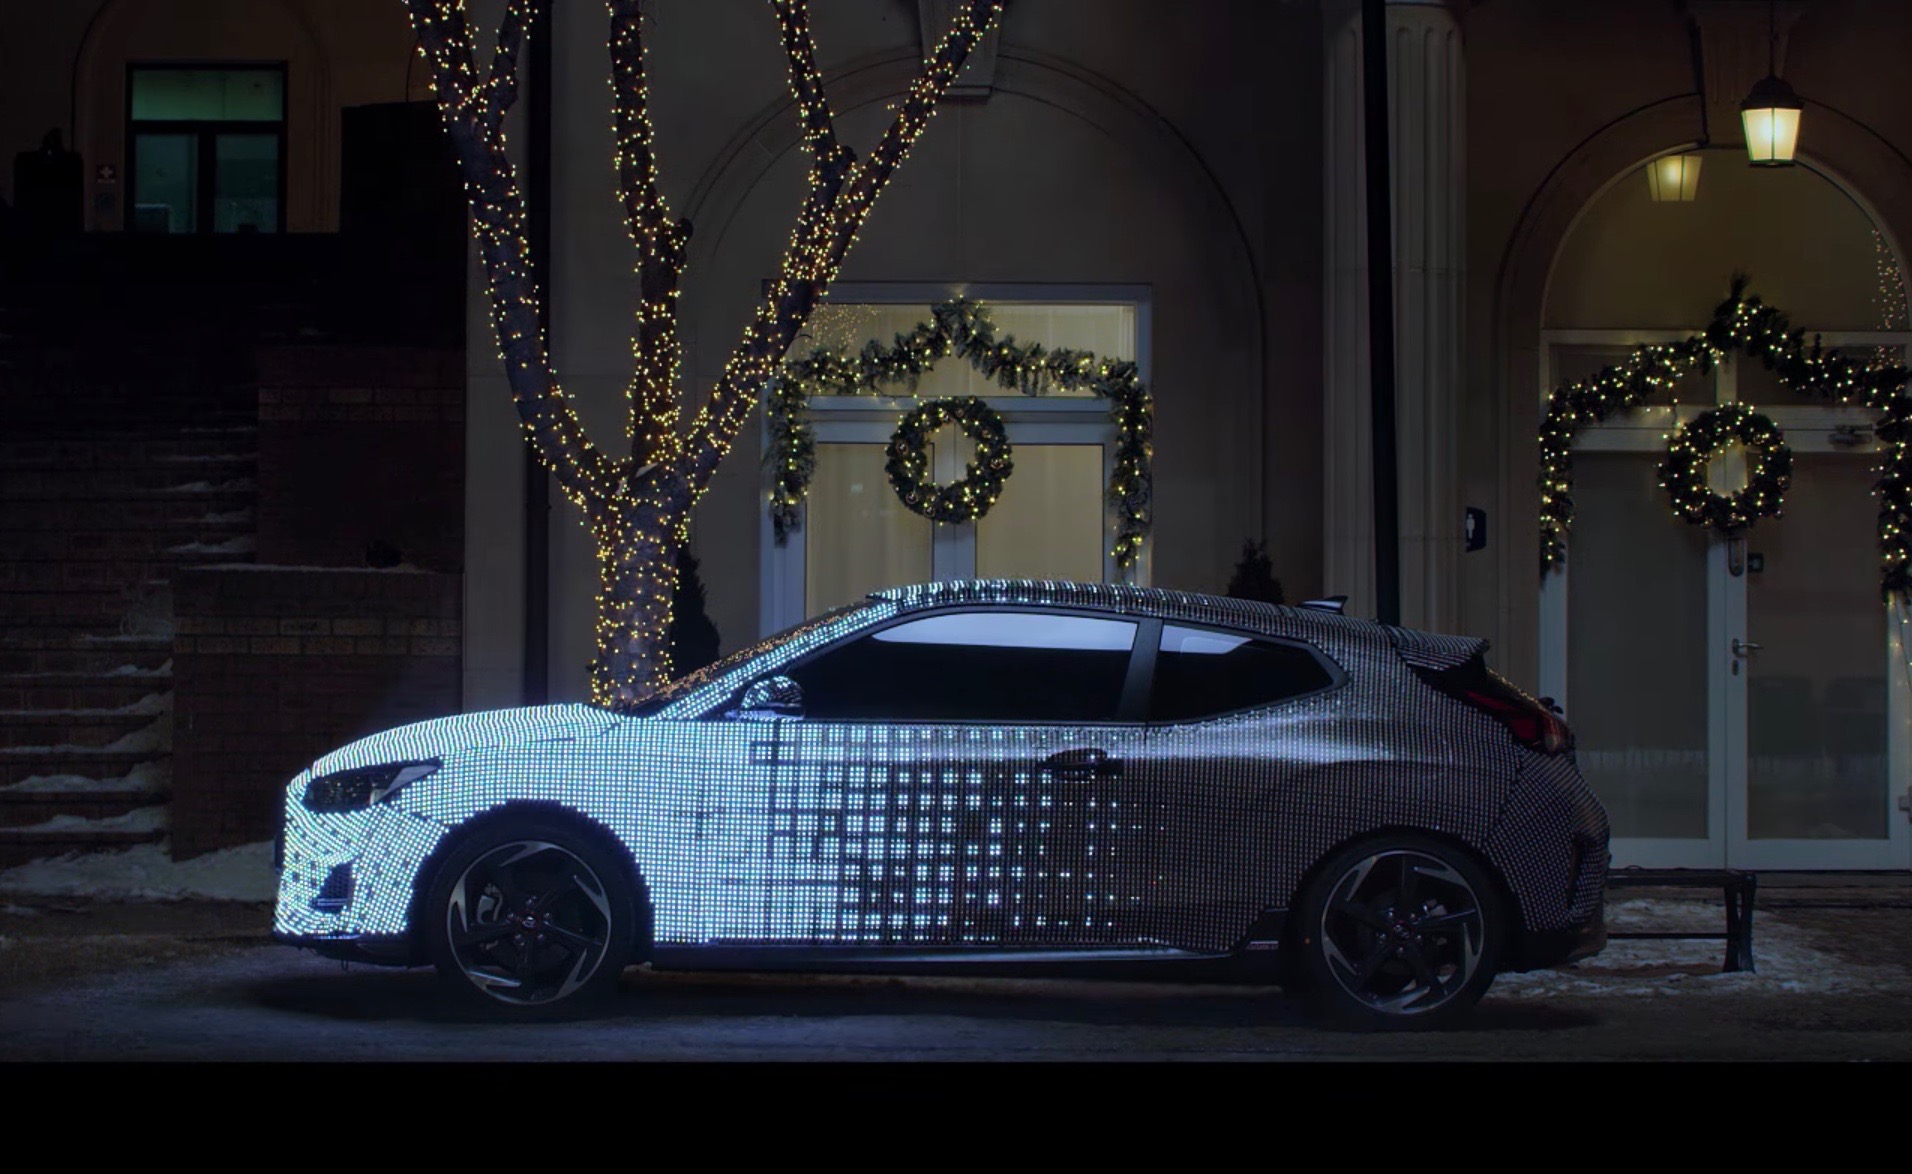 2019 Hyundai Veloster previewed again in LED light show (video)